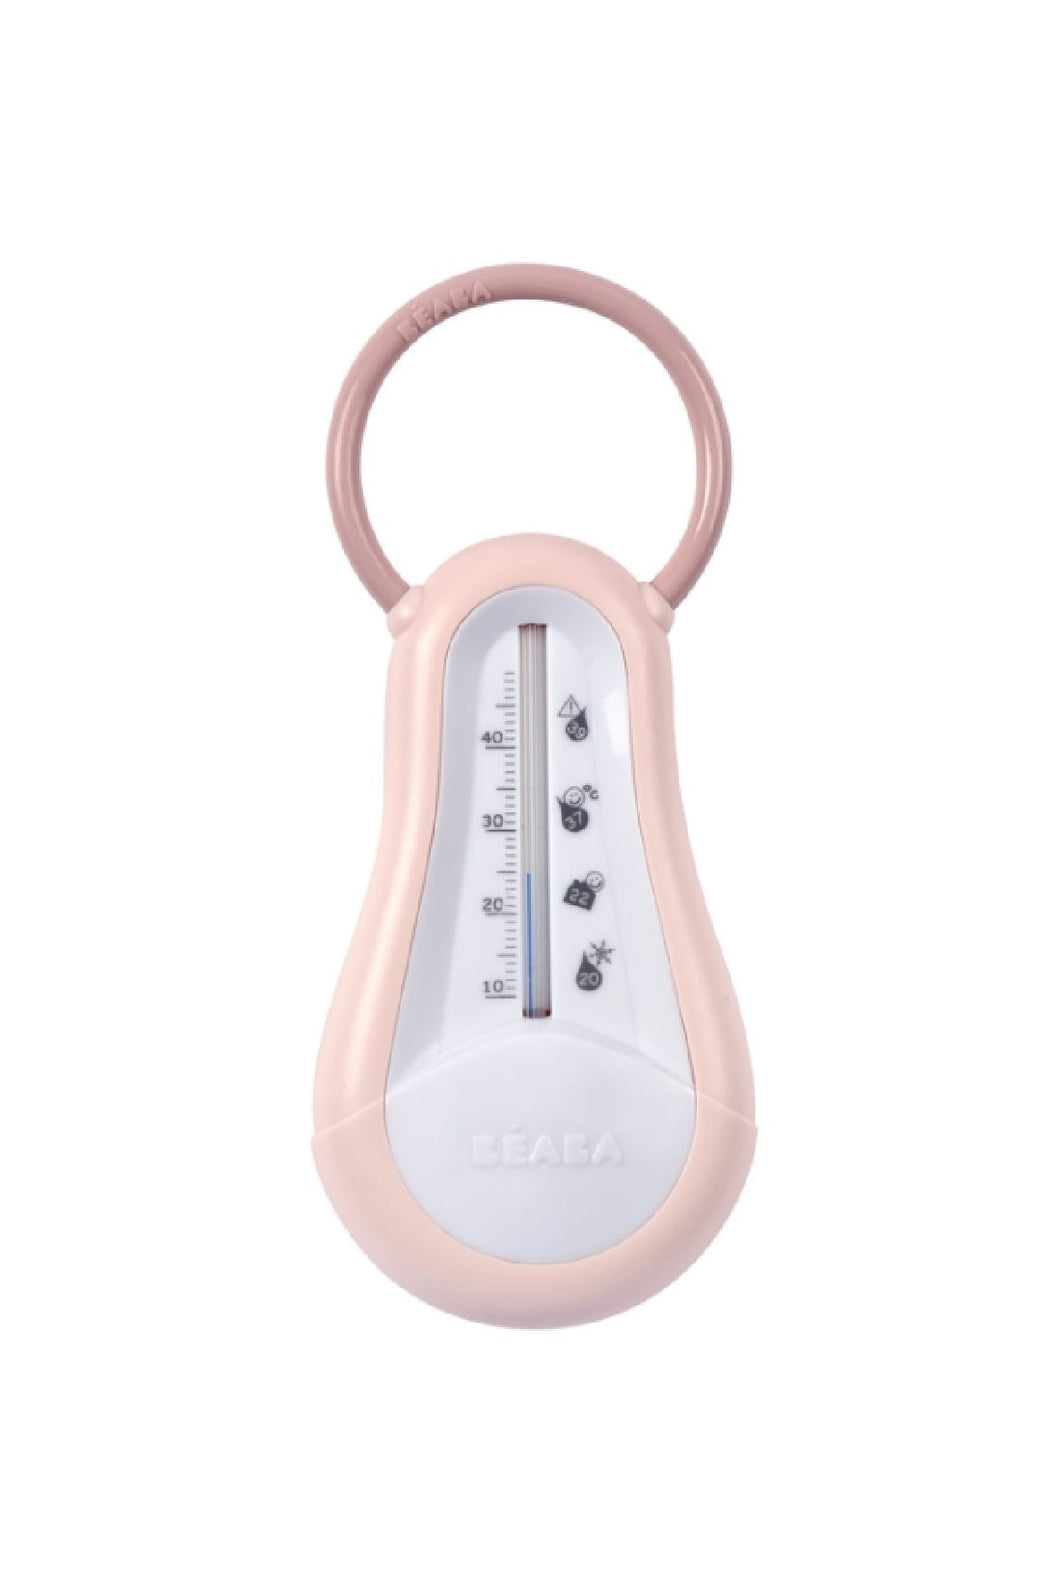 Beaba Bath Thermometer Old Pink